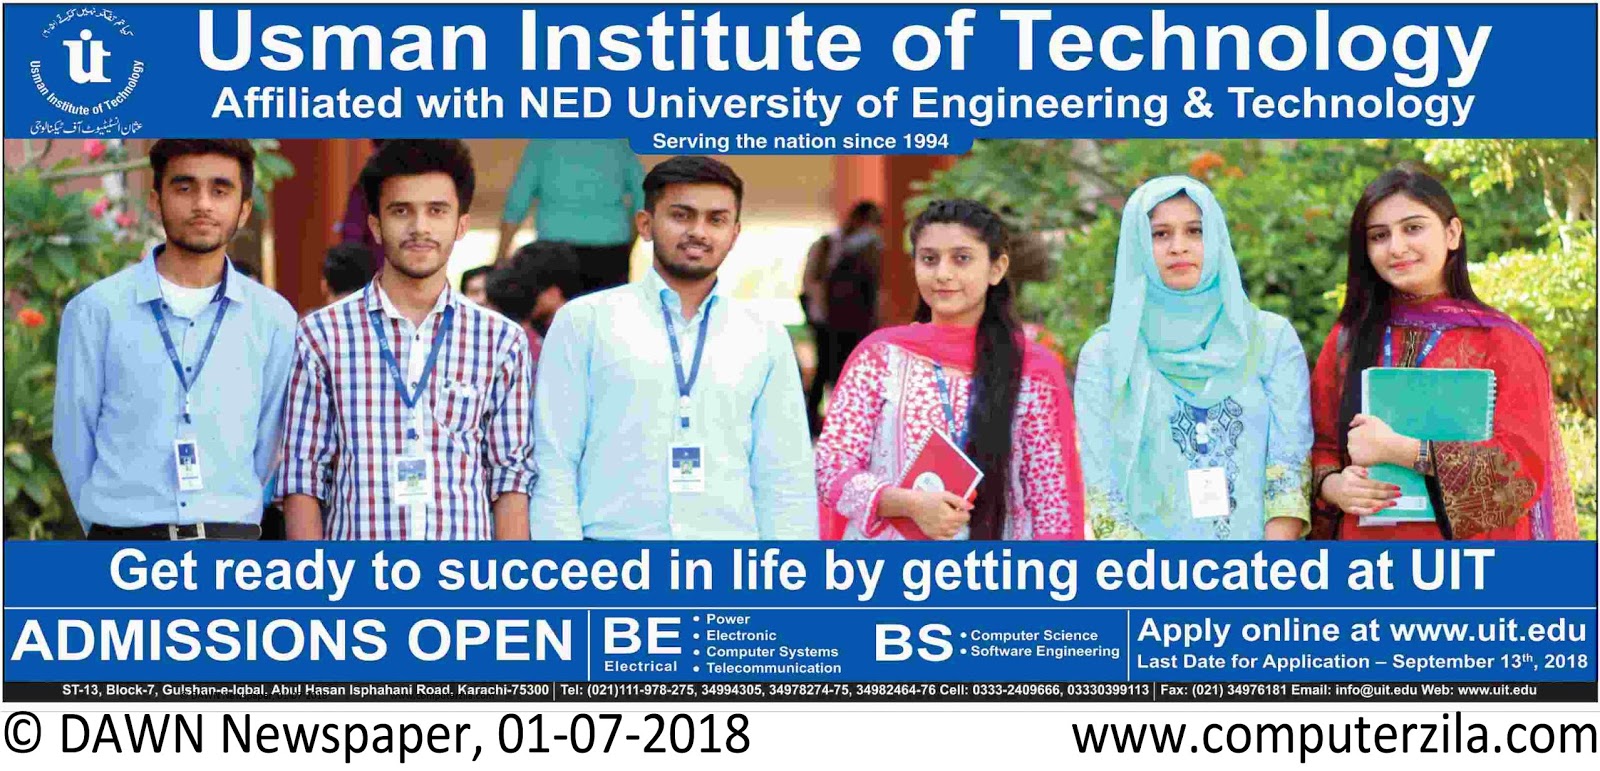 Usman Institute of Technology Admissions Fall 2018